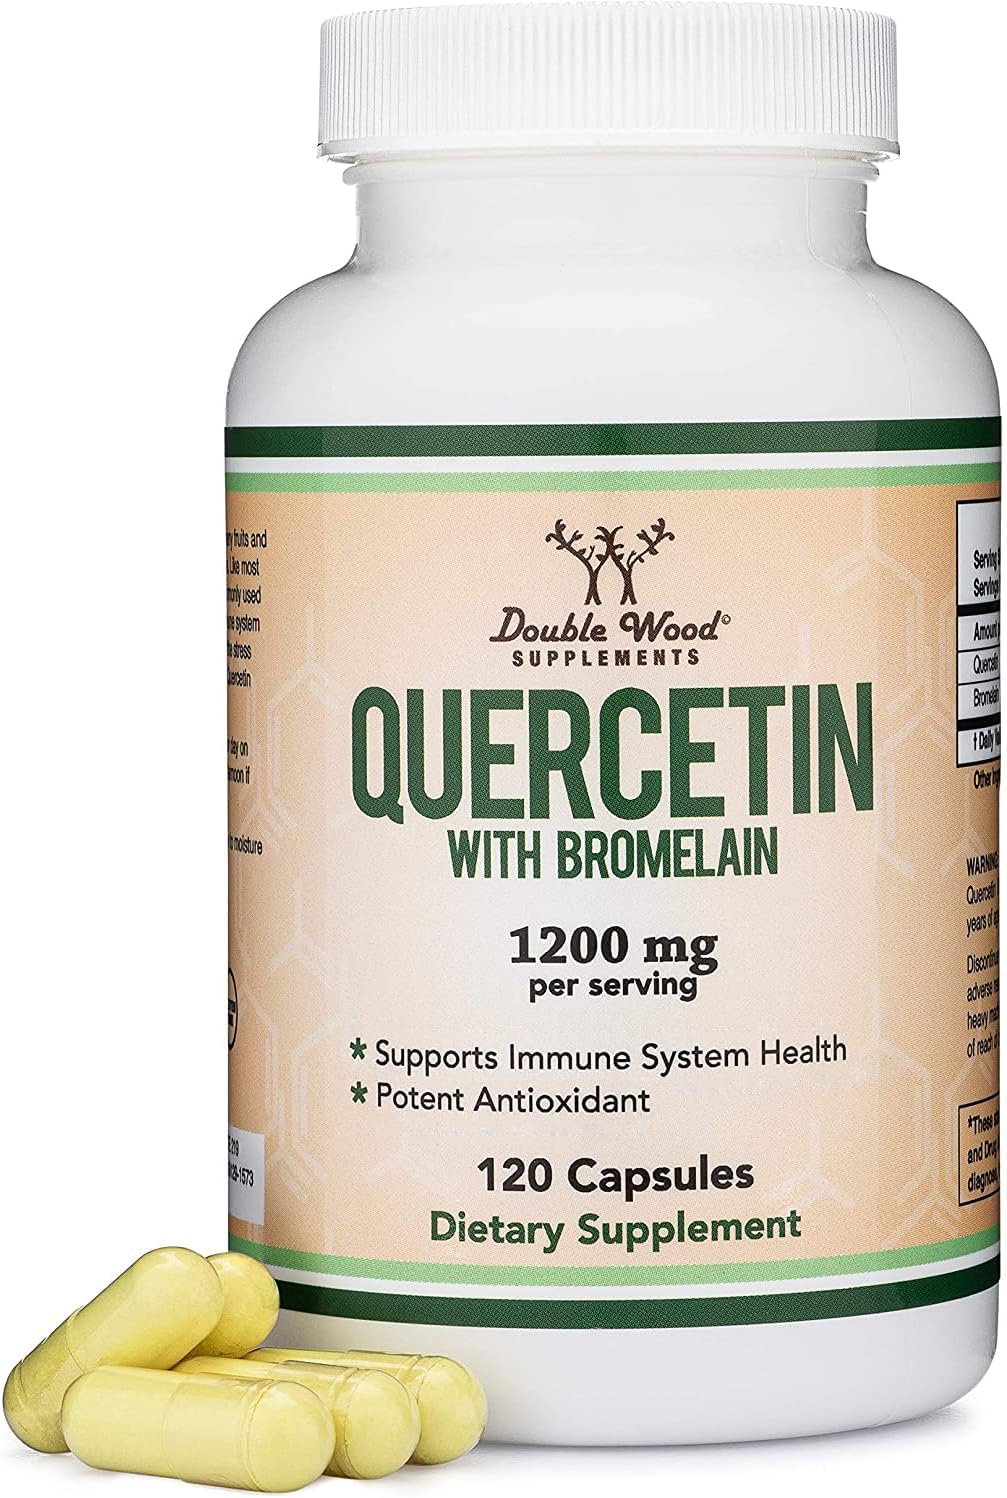 Double Wood Supplements Quercetin with Bromelain - 120 Count (1,200mg Servings) Immune Health Capsules - Supports Healthy Immune Functions in Men and Women (Vegan Safe, Manufactured in USA)